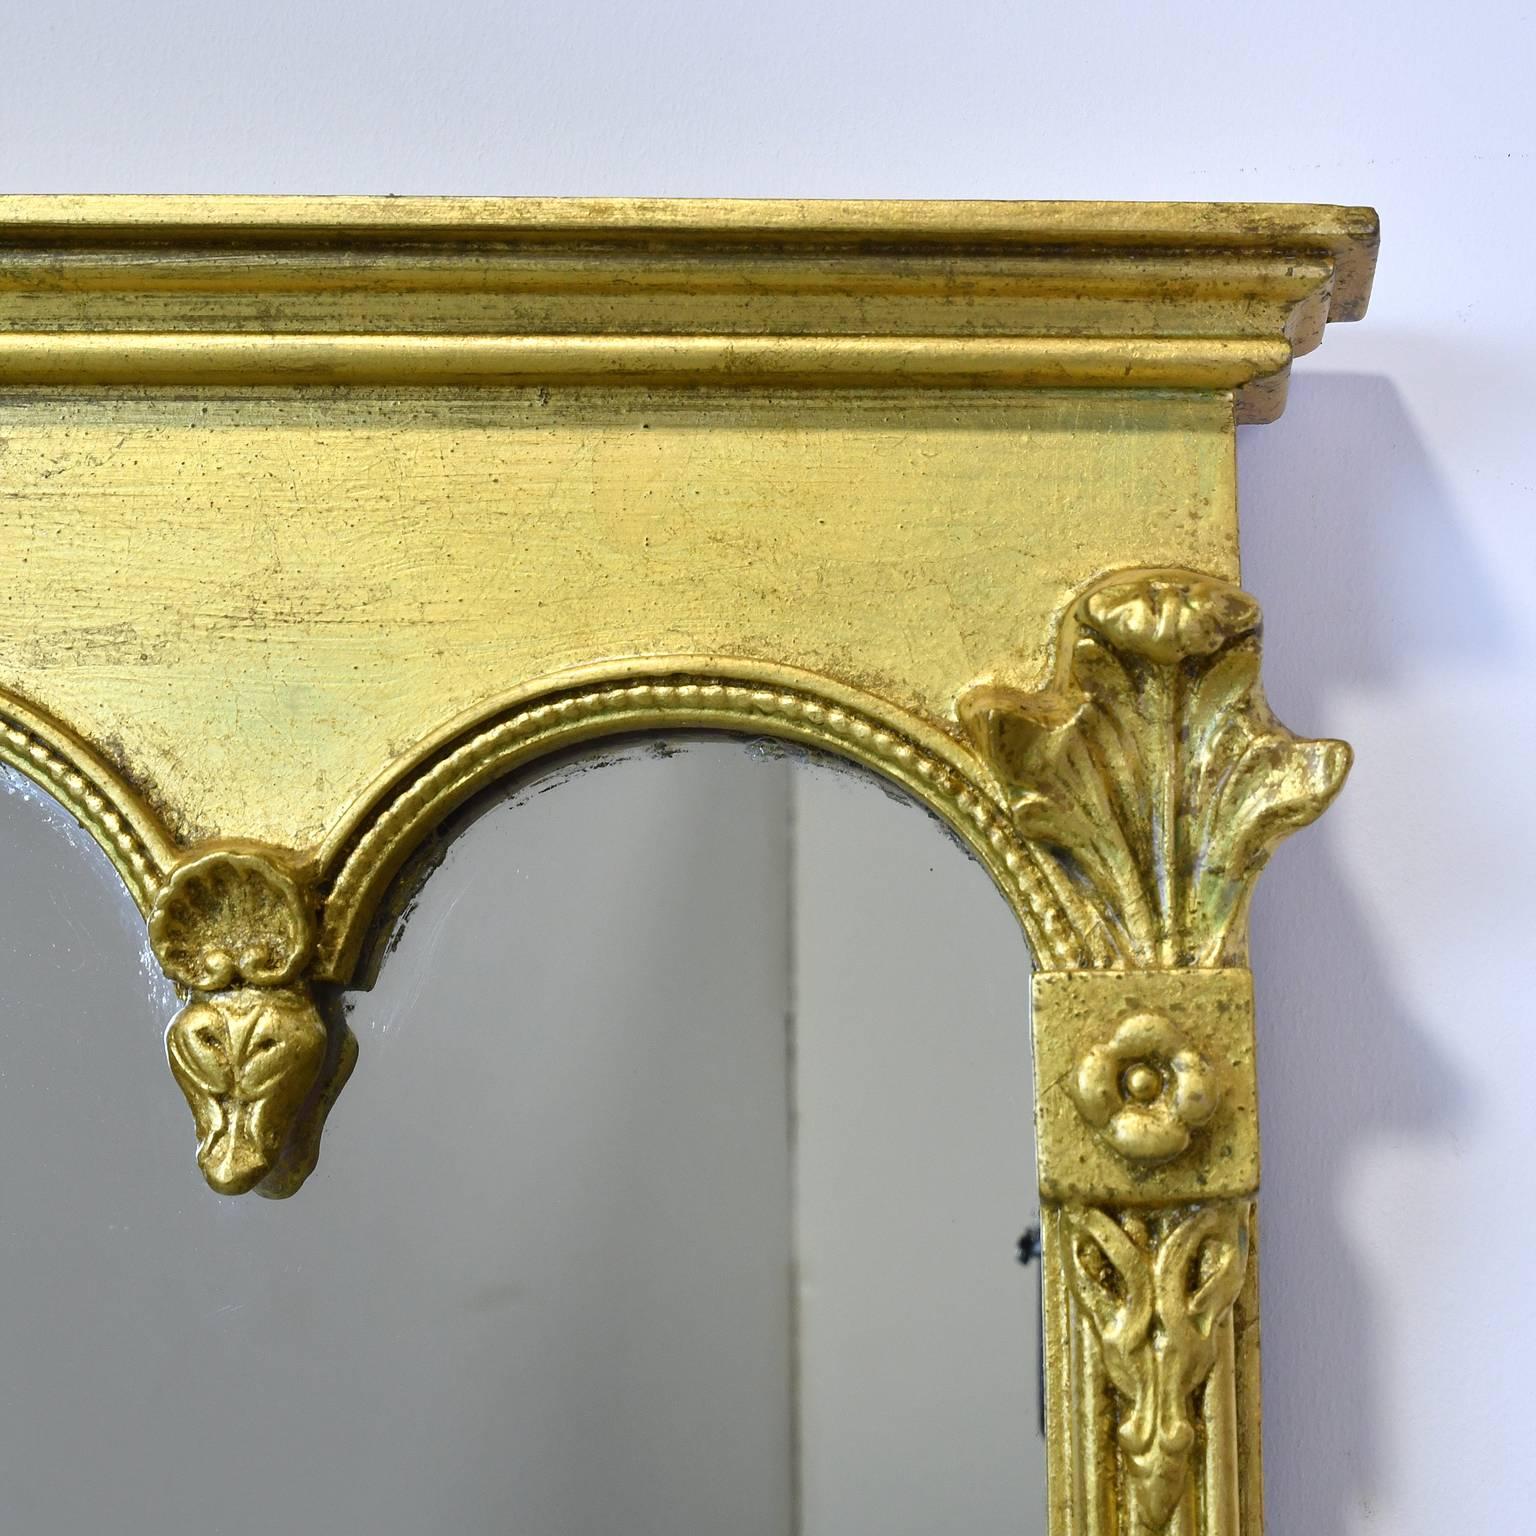 A large decorative mirror in gold leaf that is in a rectangular horizontal form, ideal over a fireplace mantel or sideboard. Embellishments include reeding, rosettes, foliage, flowers and the Prince of Wales feathers, American, circa